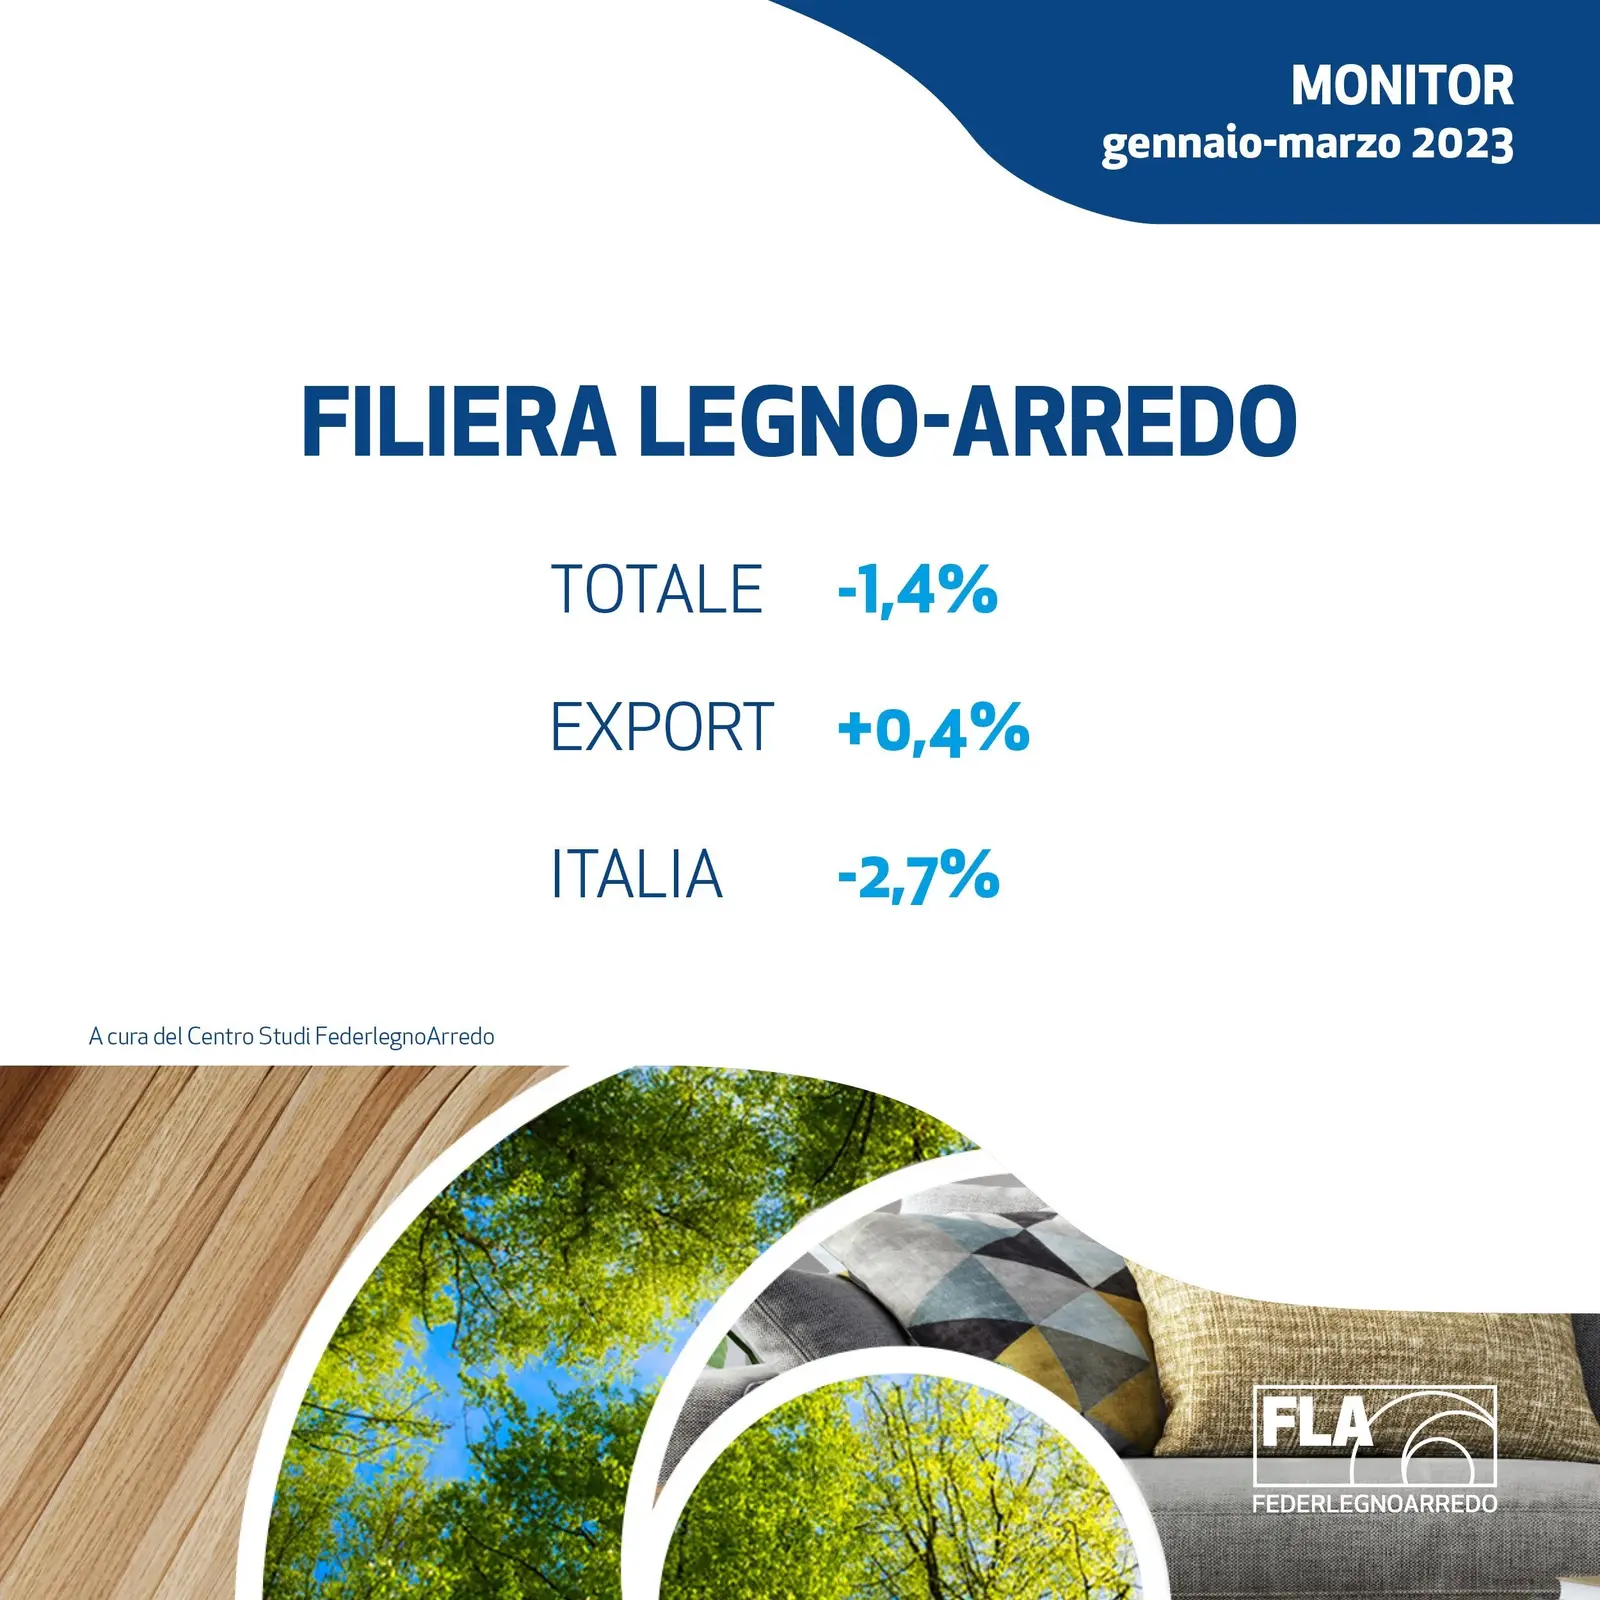 FederlegnoArredo forecasts 2023 closing at -3.3% for the wood-furniture supply chain